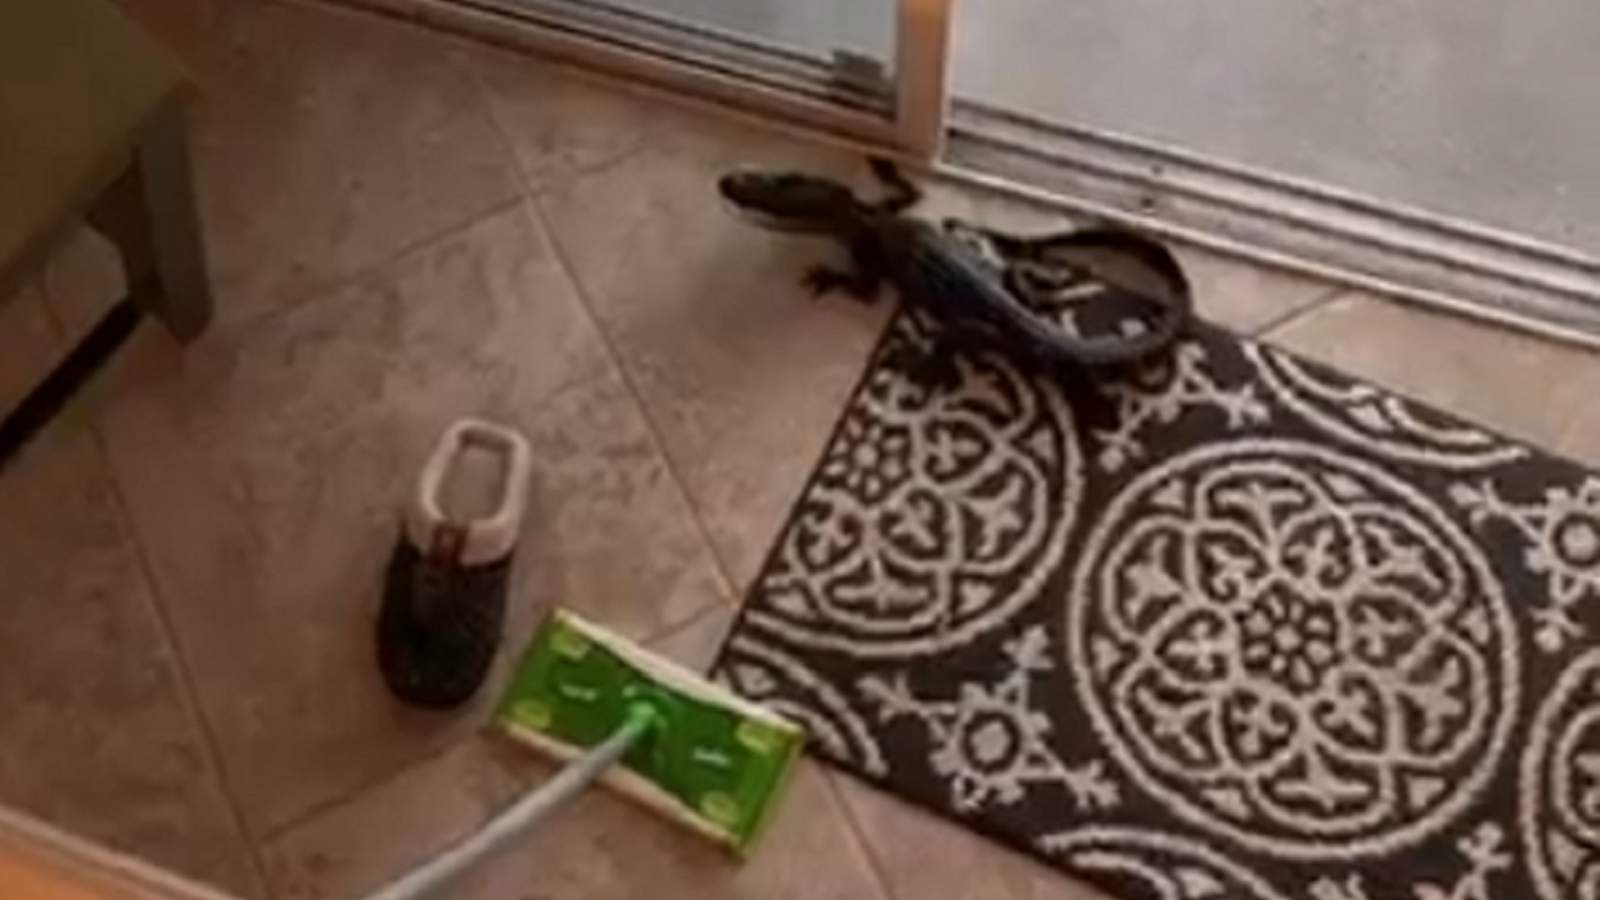 ‘Keep moving, bro:’ Watch these Florida women hilariously try to get a baby gator out of the house